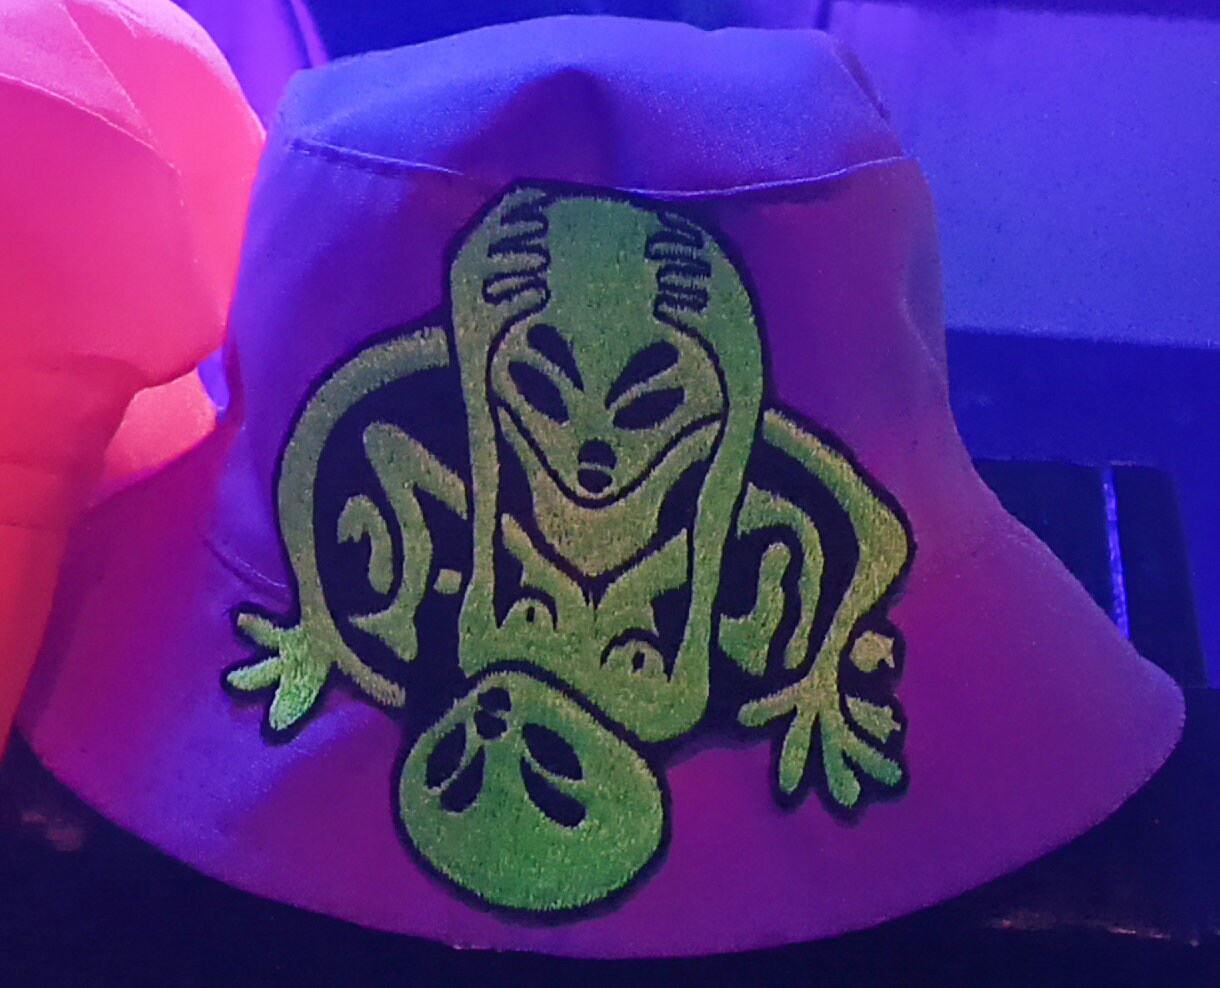 Alien Love UV Purple Fisher Hat blacklight glowing with embroidery patch psychedelic trance goatrance hippie fisherhat Funny Goa Gear